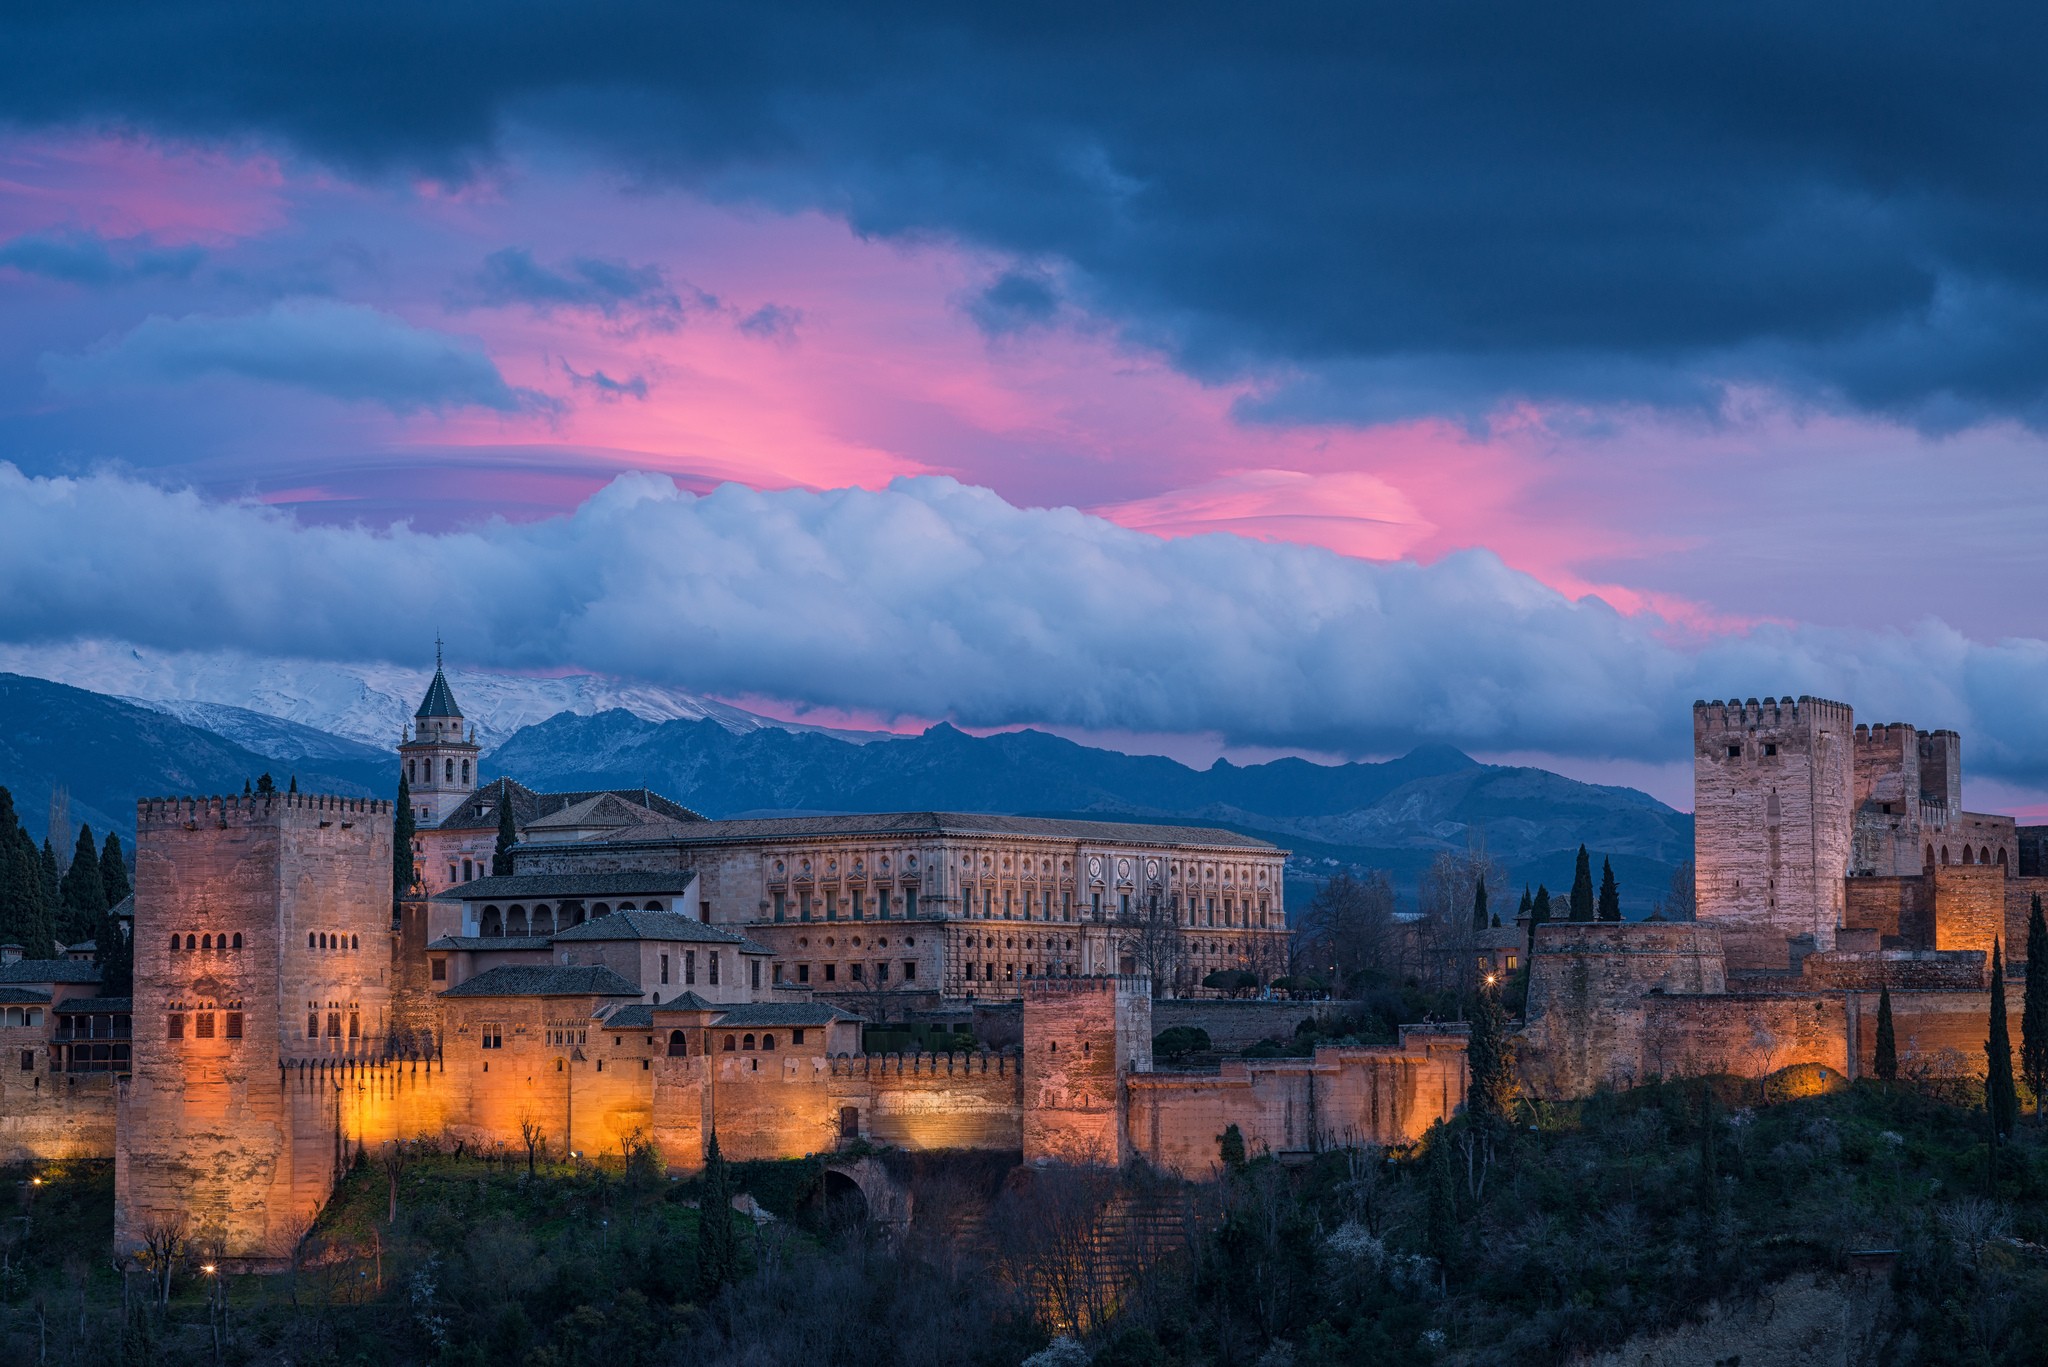 General 2048x1367 landscape castle clouds hills trees Spain sunset mountains old building lights La Alhambra Granada Andalusia